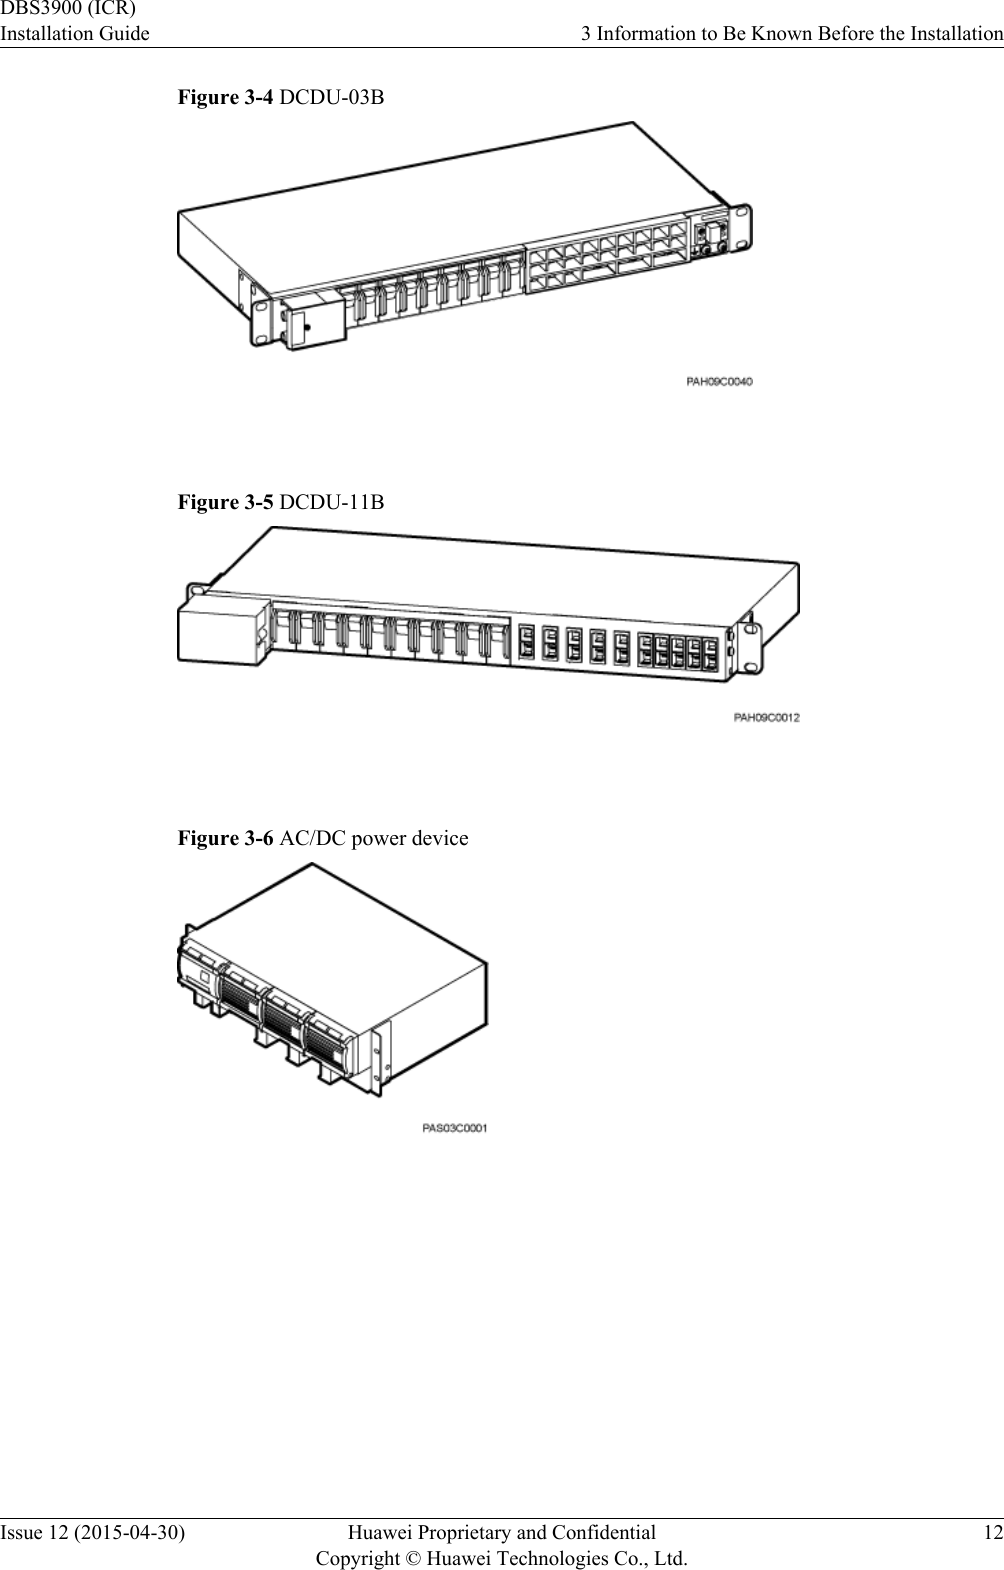 Figure 3-4 DCDU-03B Figure 3-5 DCDU-11B Figure 3-6 AC/DC power device DBS3900 (ICR)Installation Guide 3 Information to Be Known Before the InstallationIssue 12 (2015-04-30) Huawei Proprietary and ConfidentialCopyright © Huawei Technologies Co., Ltd.12